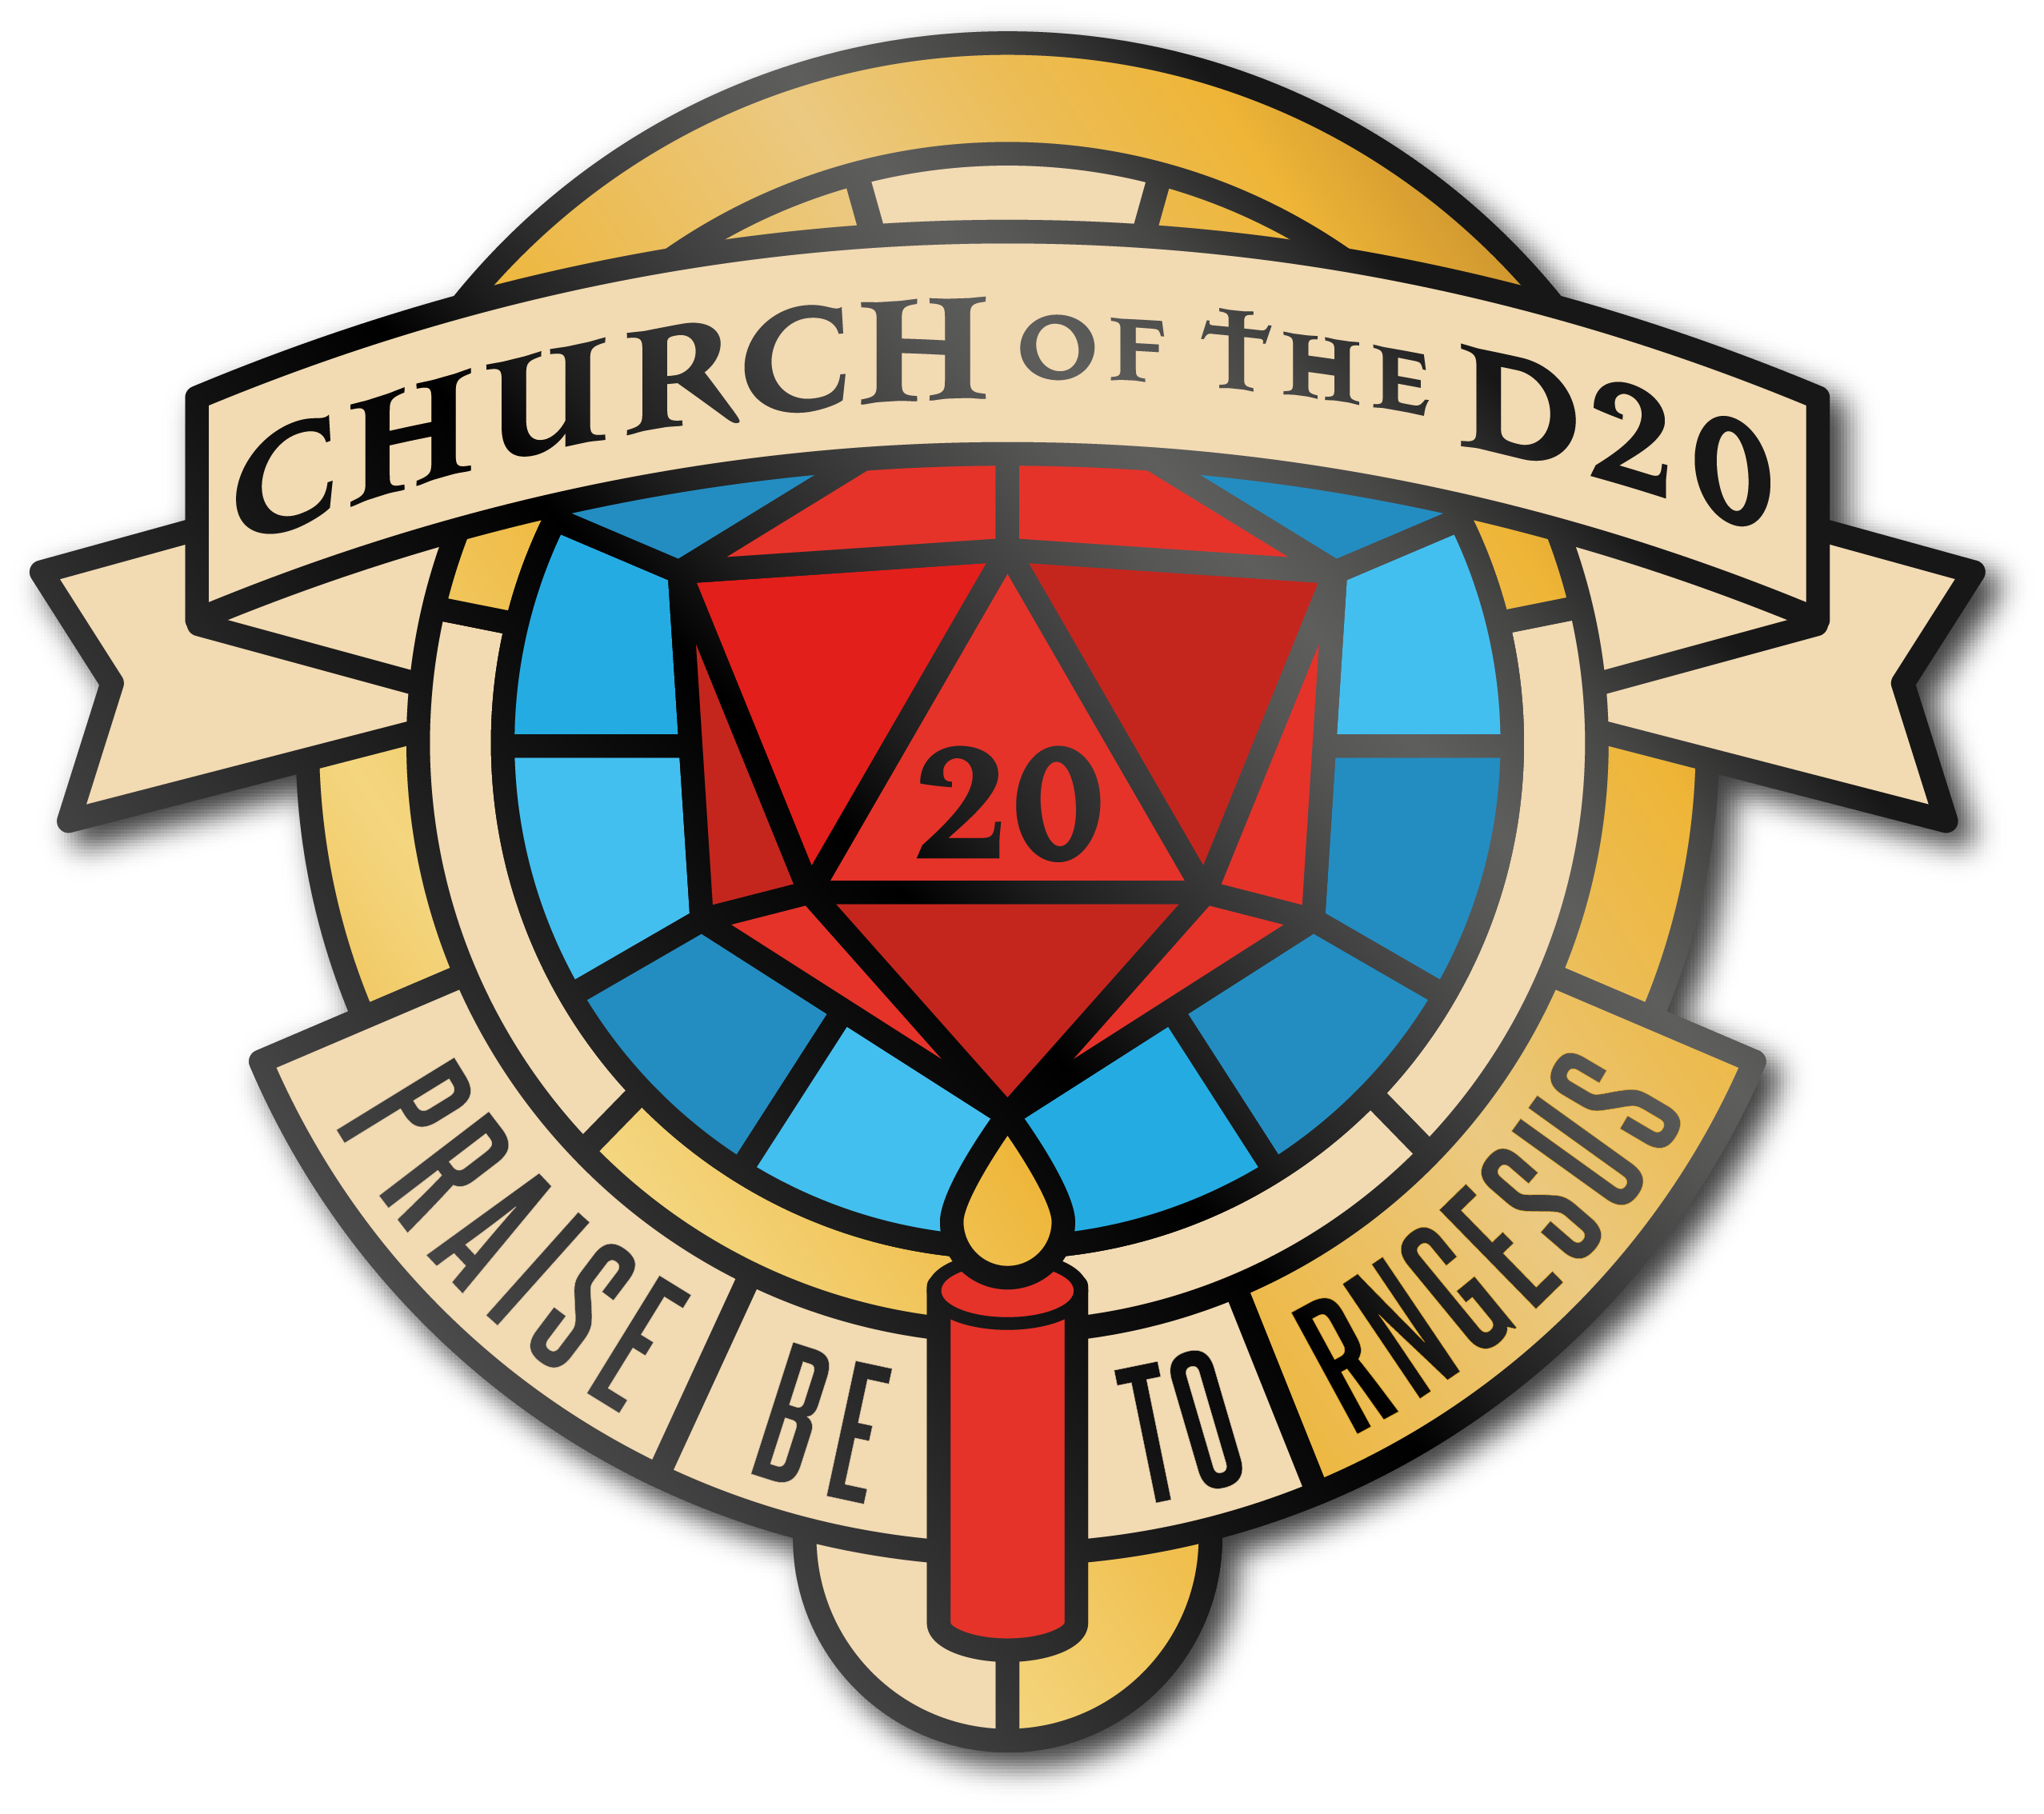 Church of the D20